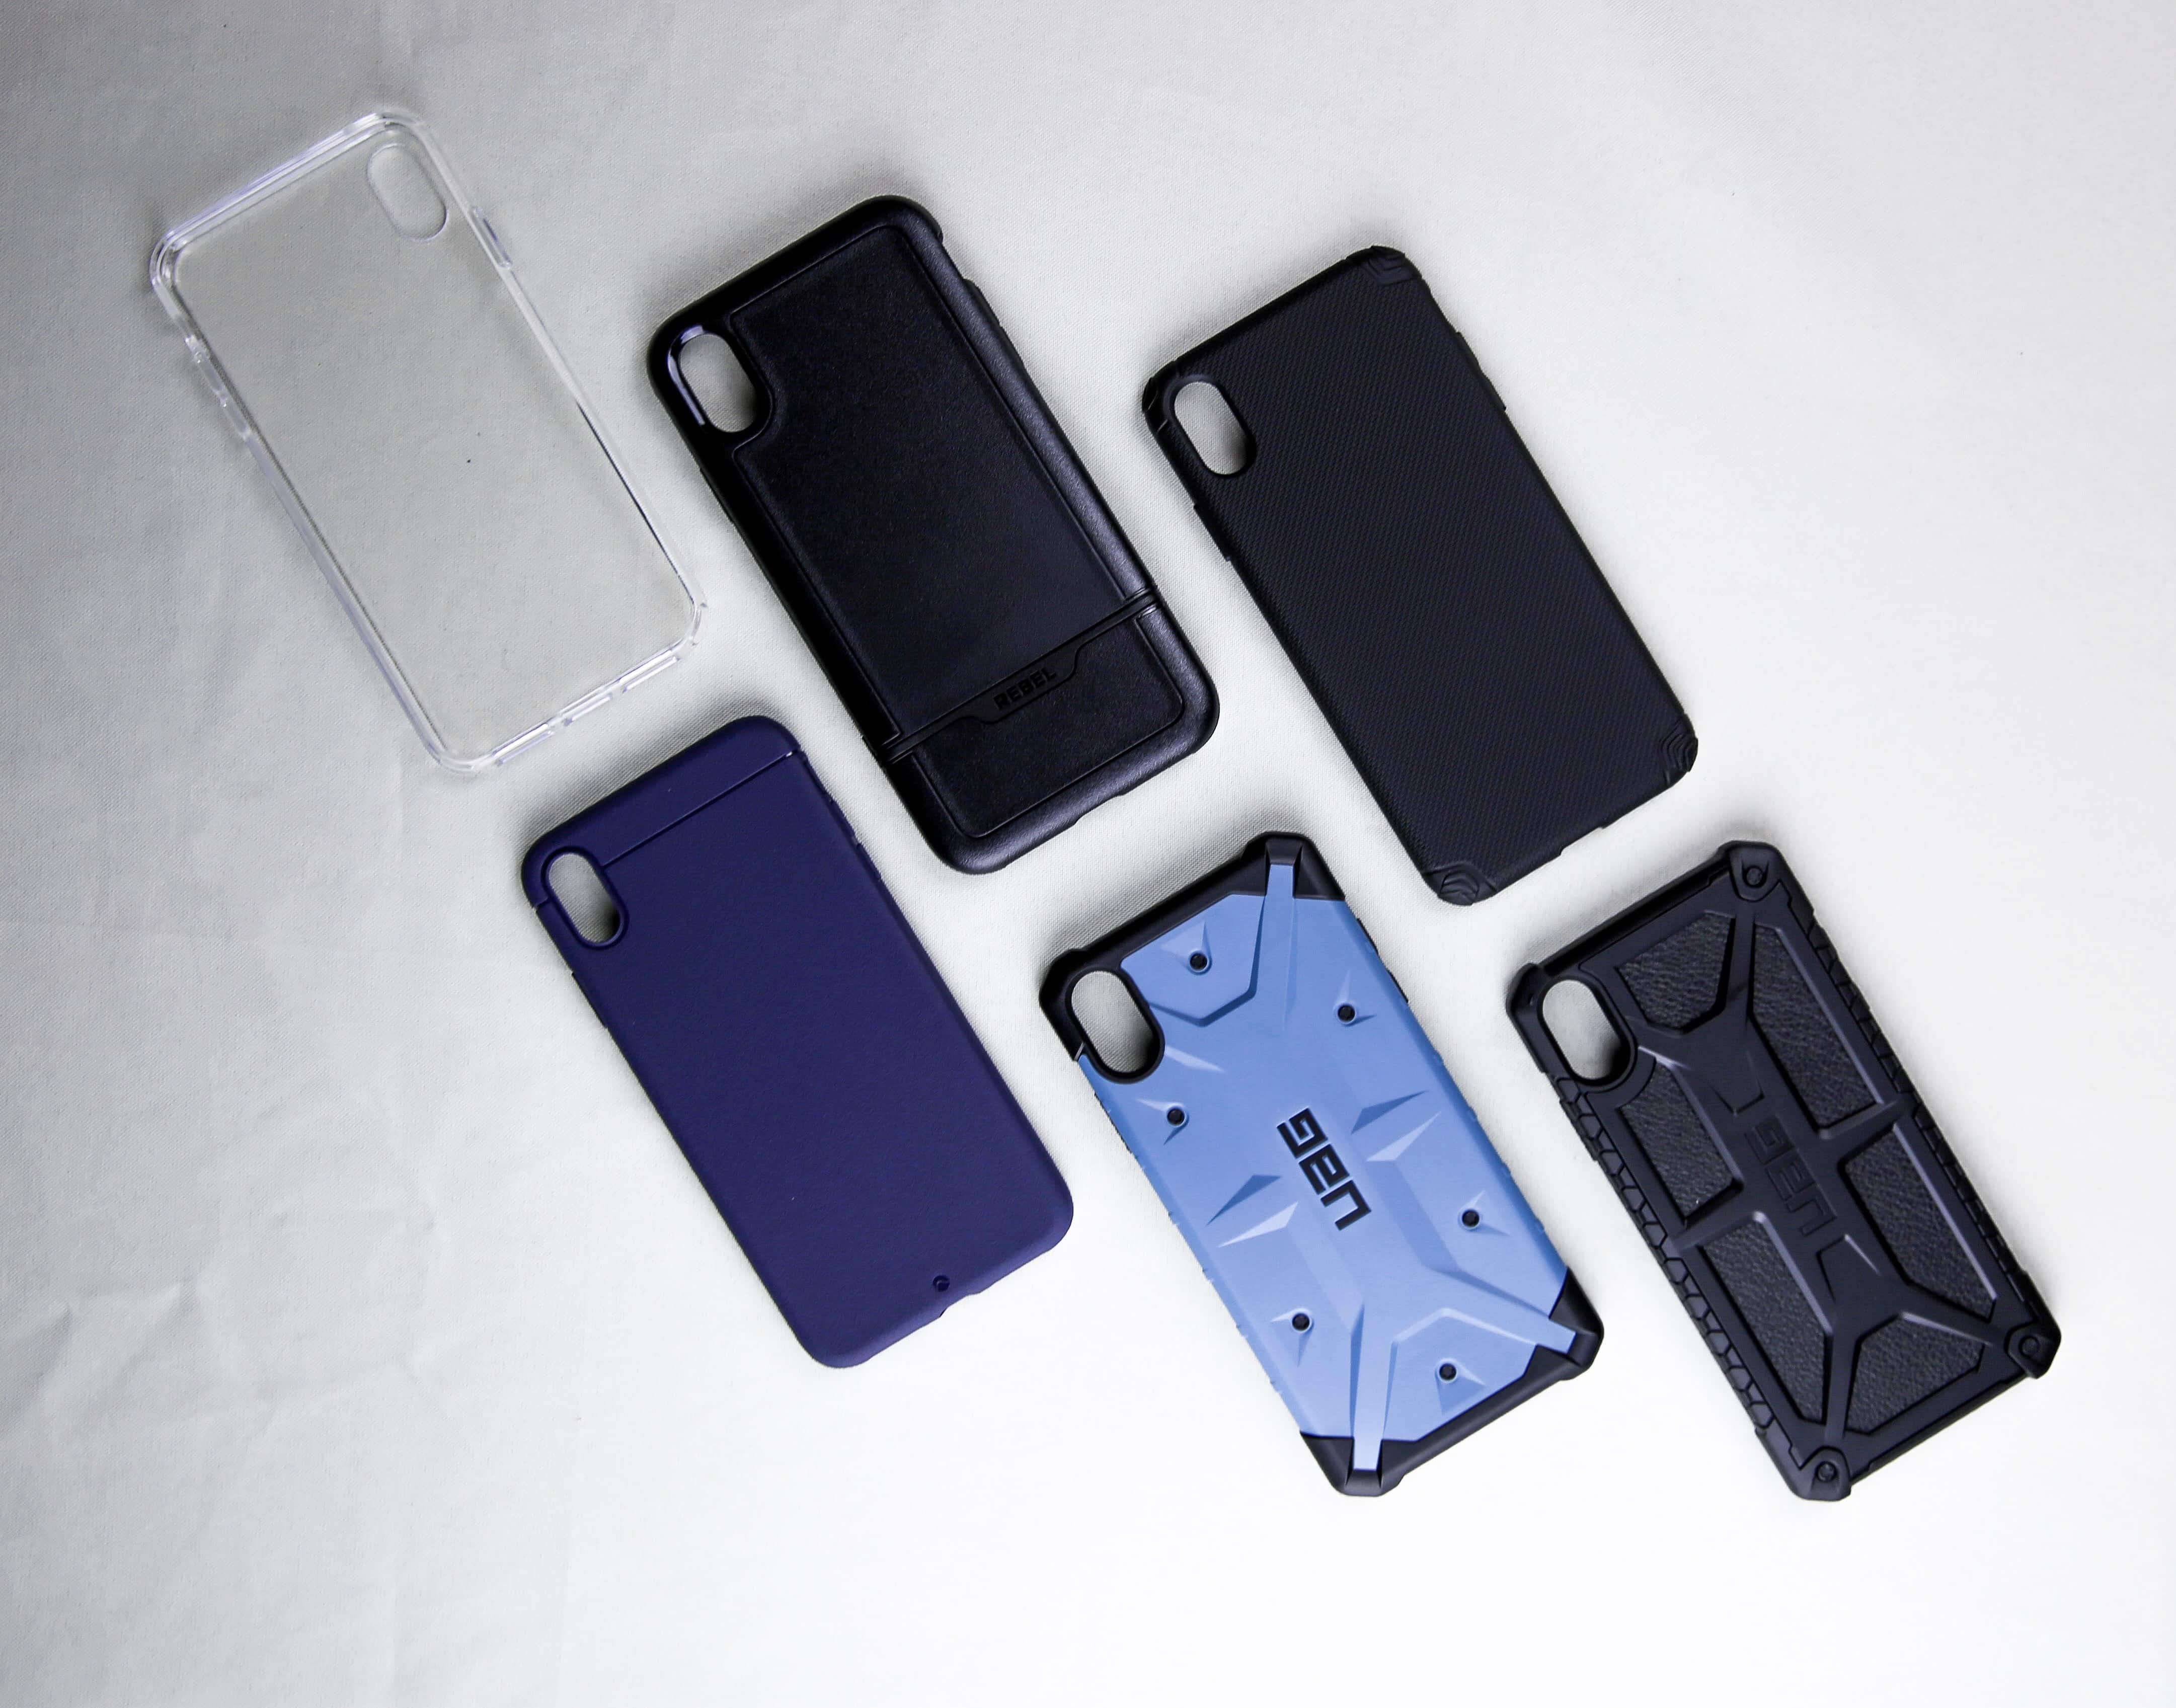 Sport style and durability with a collection of our favorite iPhone XS Max cases.